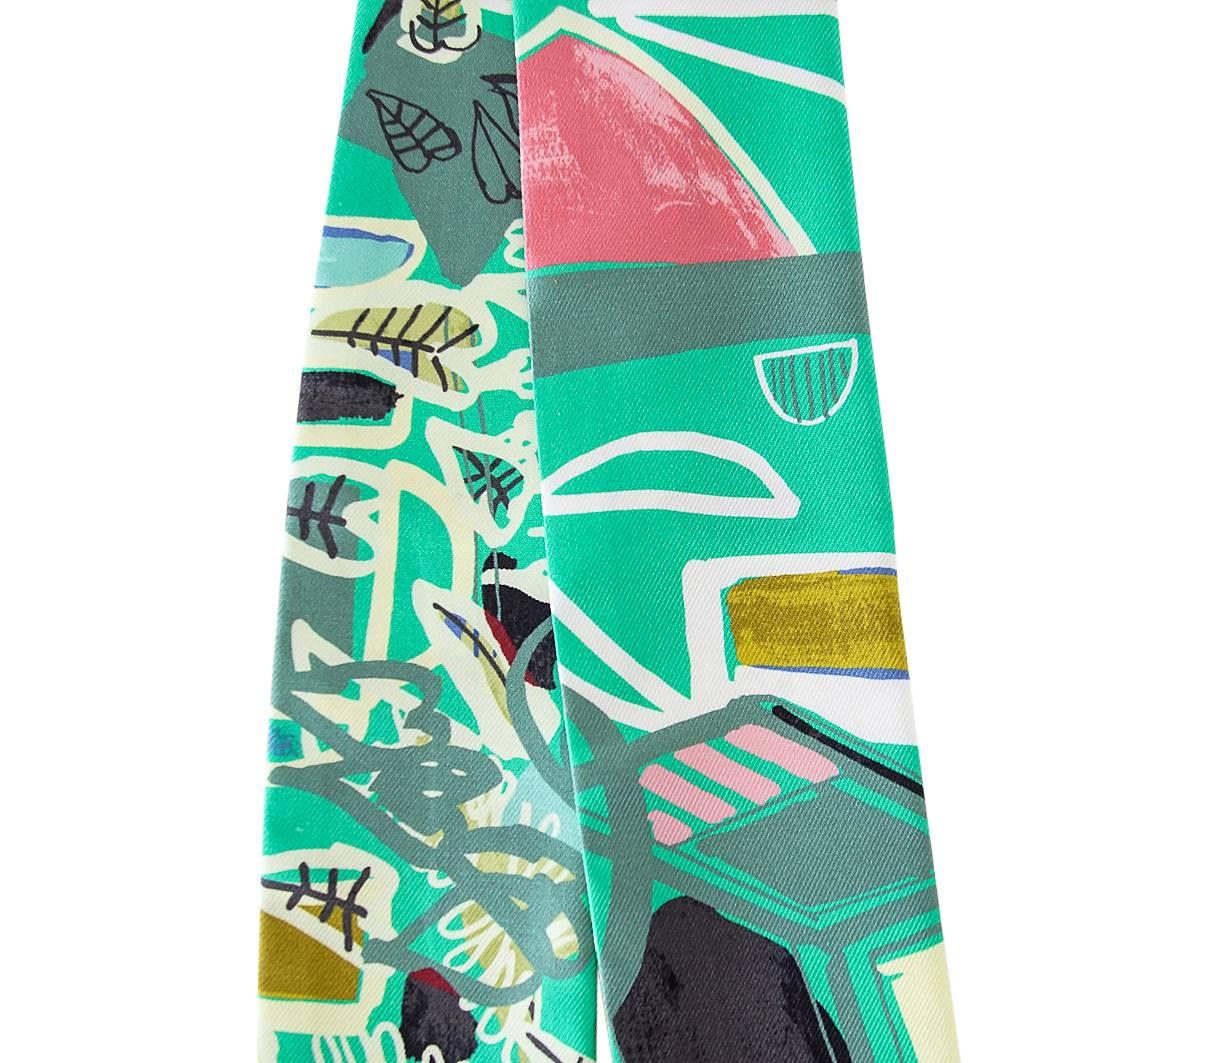 Guaranteed authentic Hermes rare Modernisme Tropical by Filipe Jardim Twilly in shades of green accentuated with blue black and pink.
Fresh abstract print for summer.
Each one comes with Hermes box.
NEW or  NEVER WORN
final sale

SIZE
32